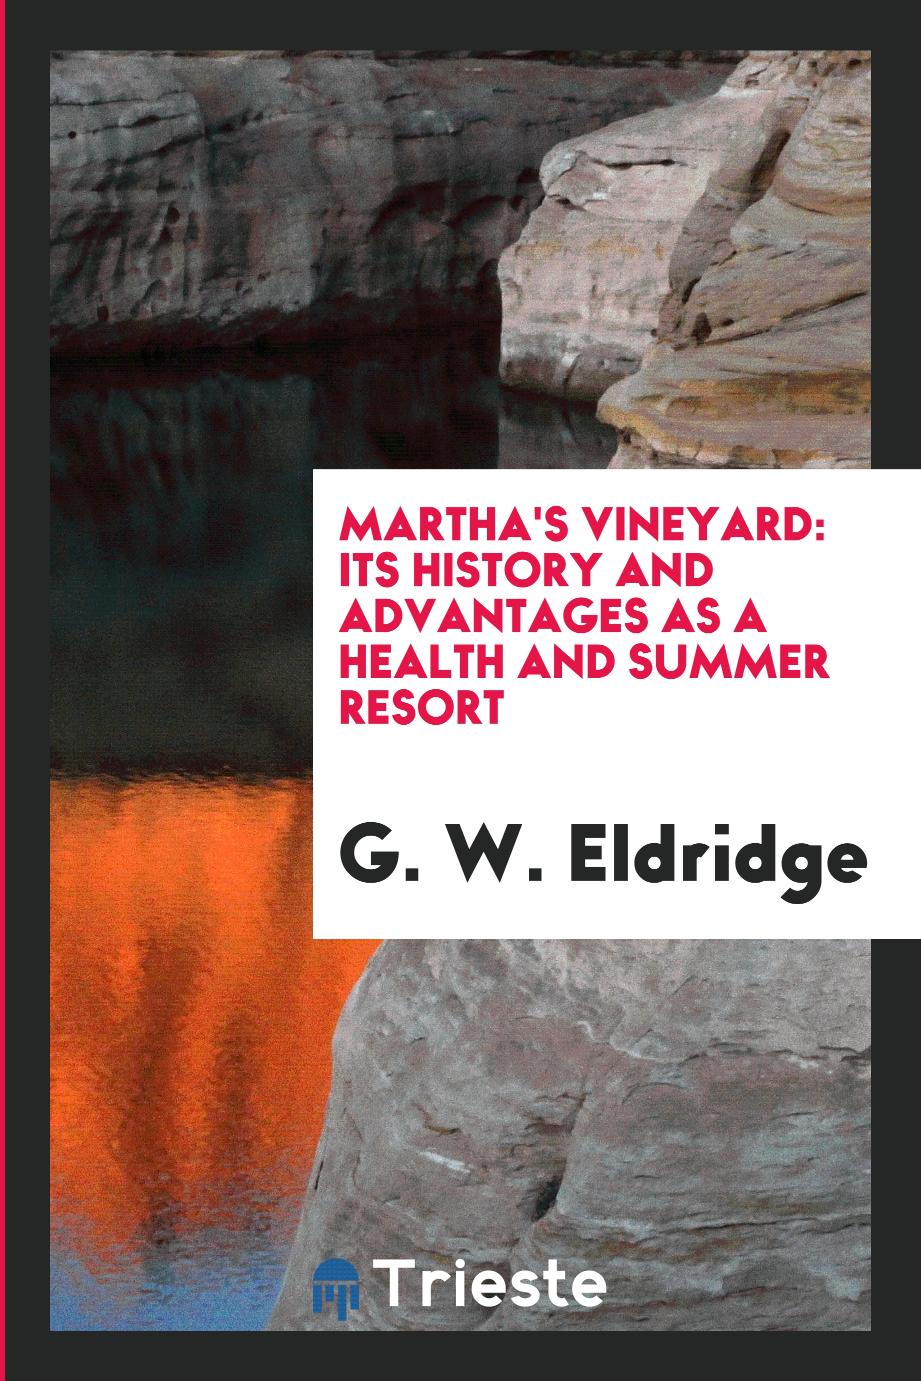 Martha's Vineyard: Its History and Advantages as a Health and Summer Resort